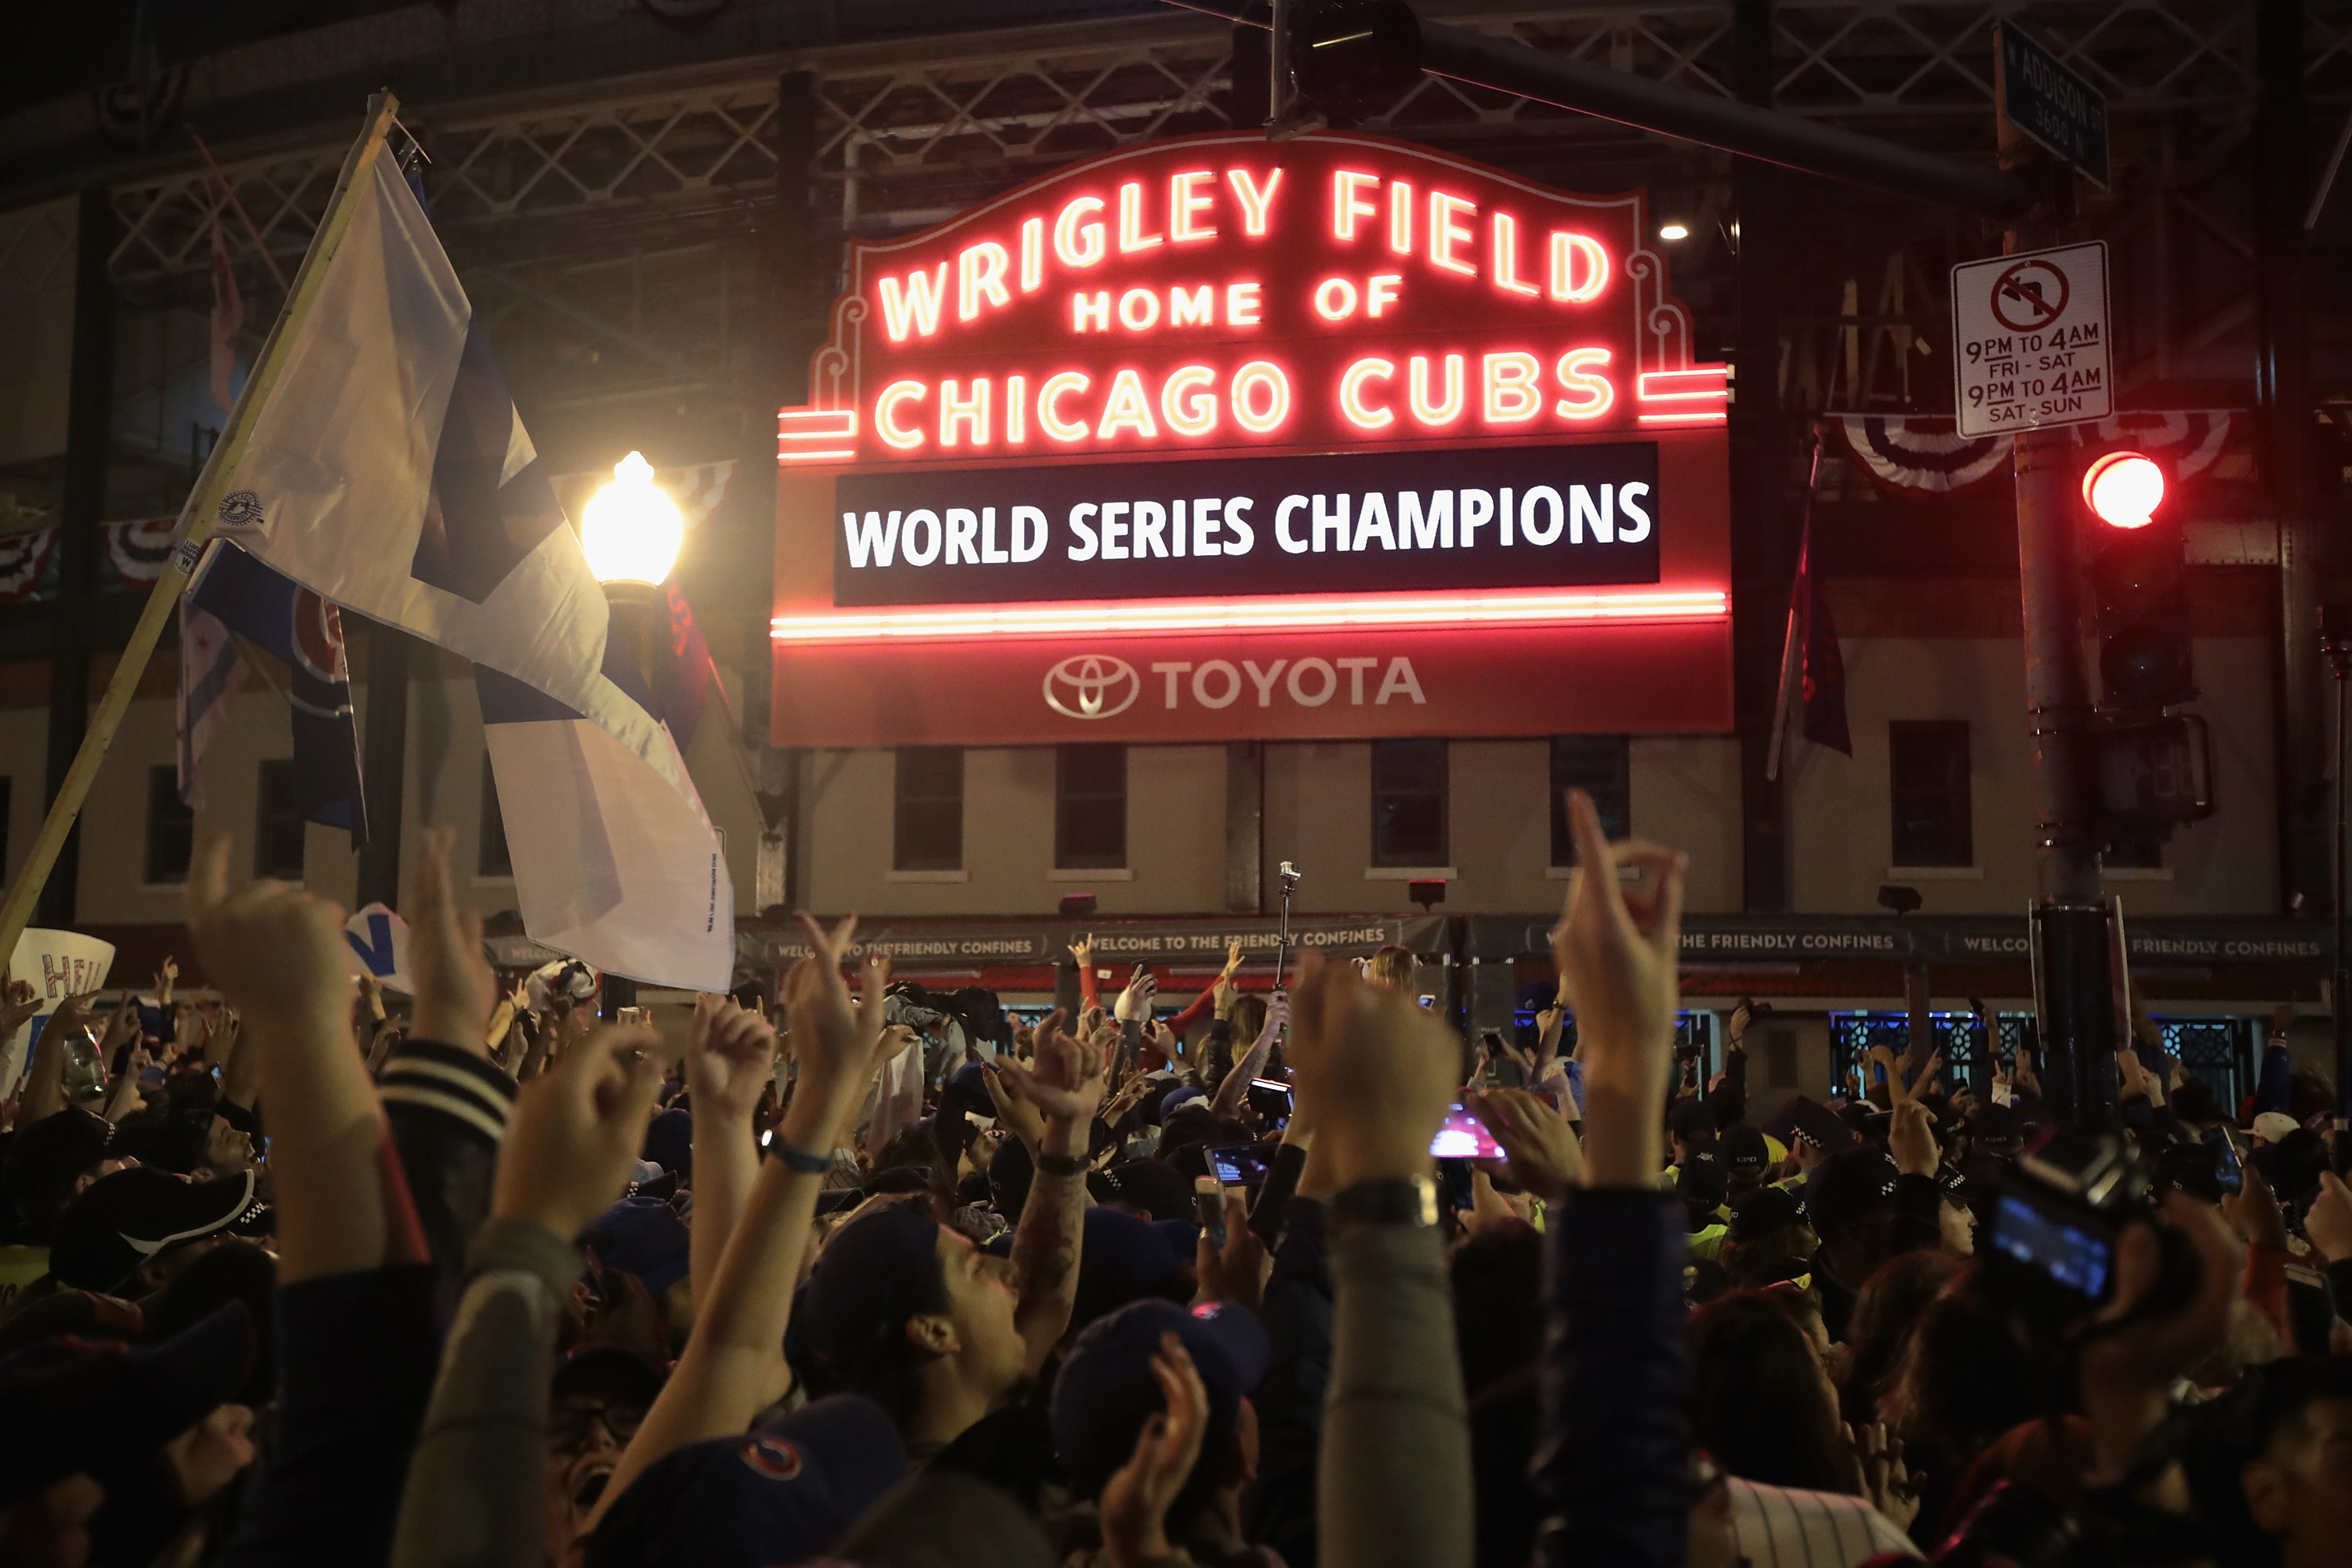 Cubs fans celebrate outside of Wrigley Field / photo by Scott Olson/Getty Images